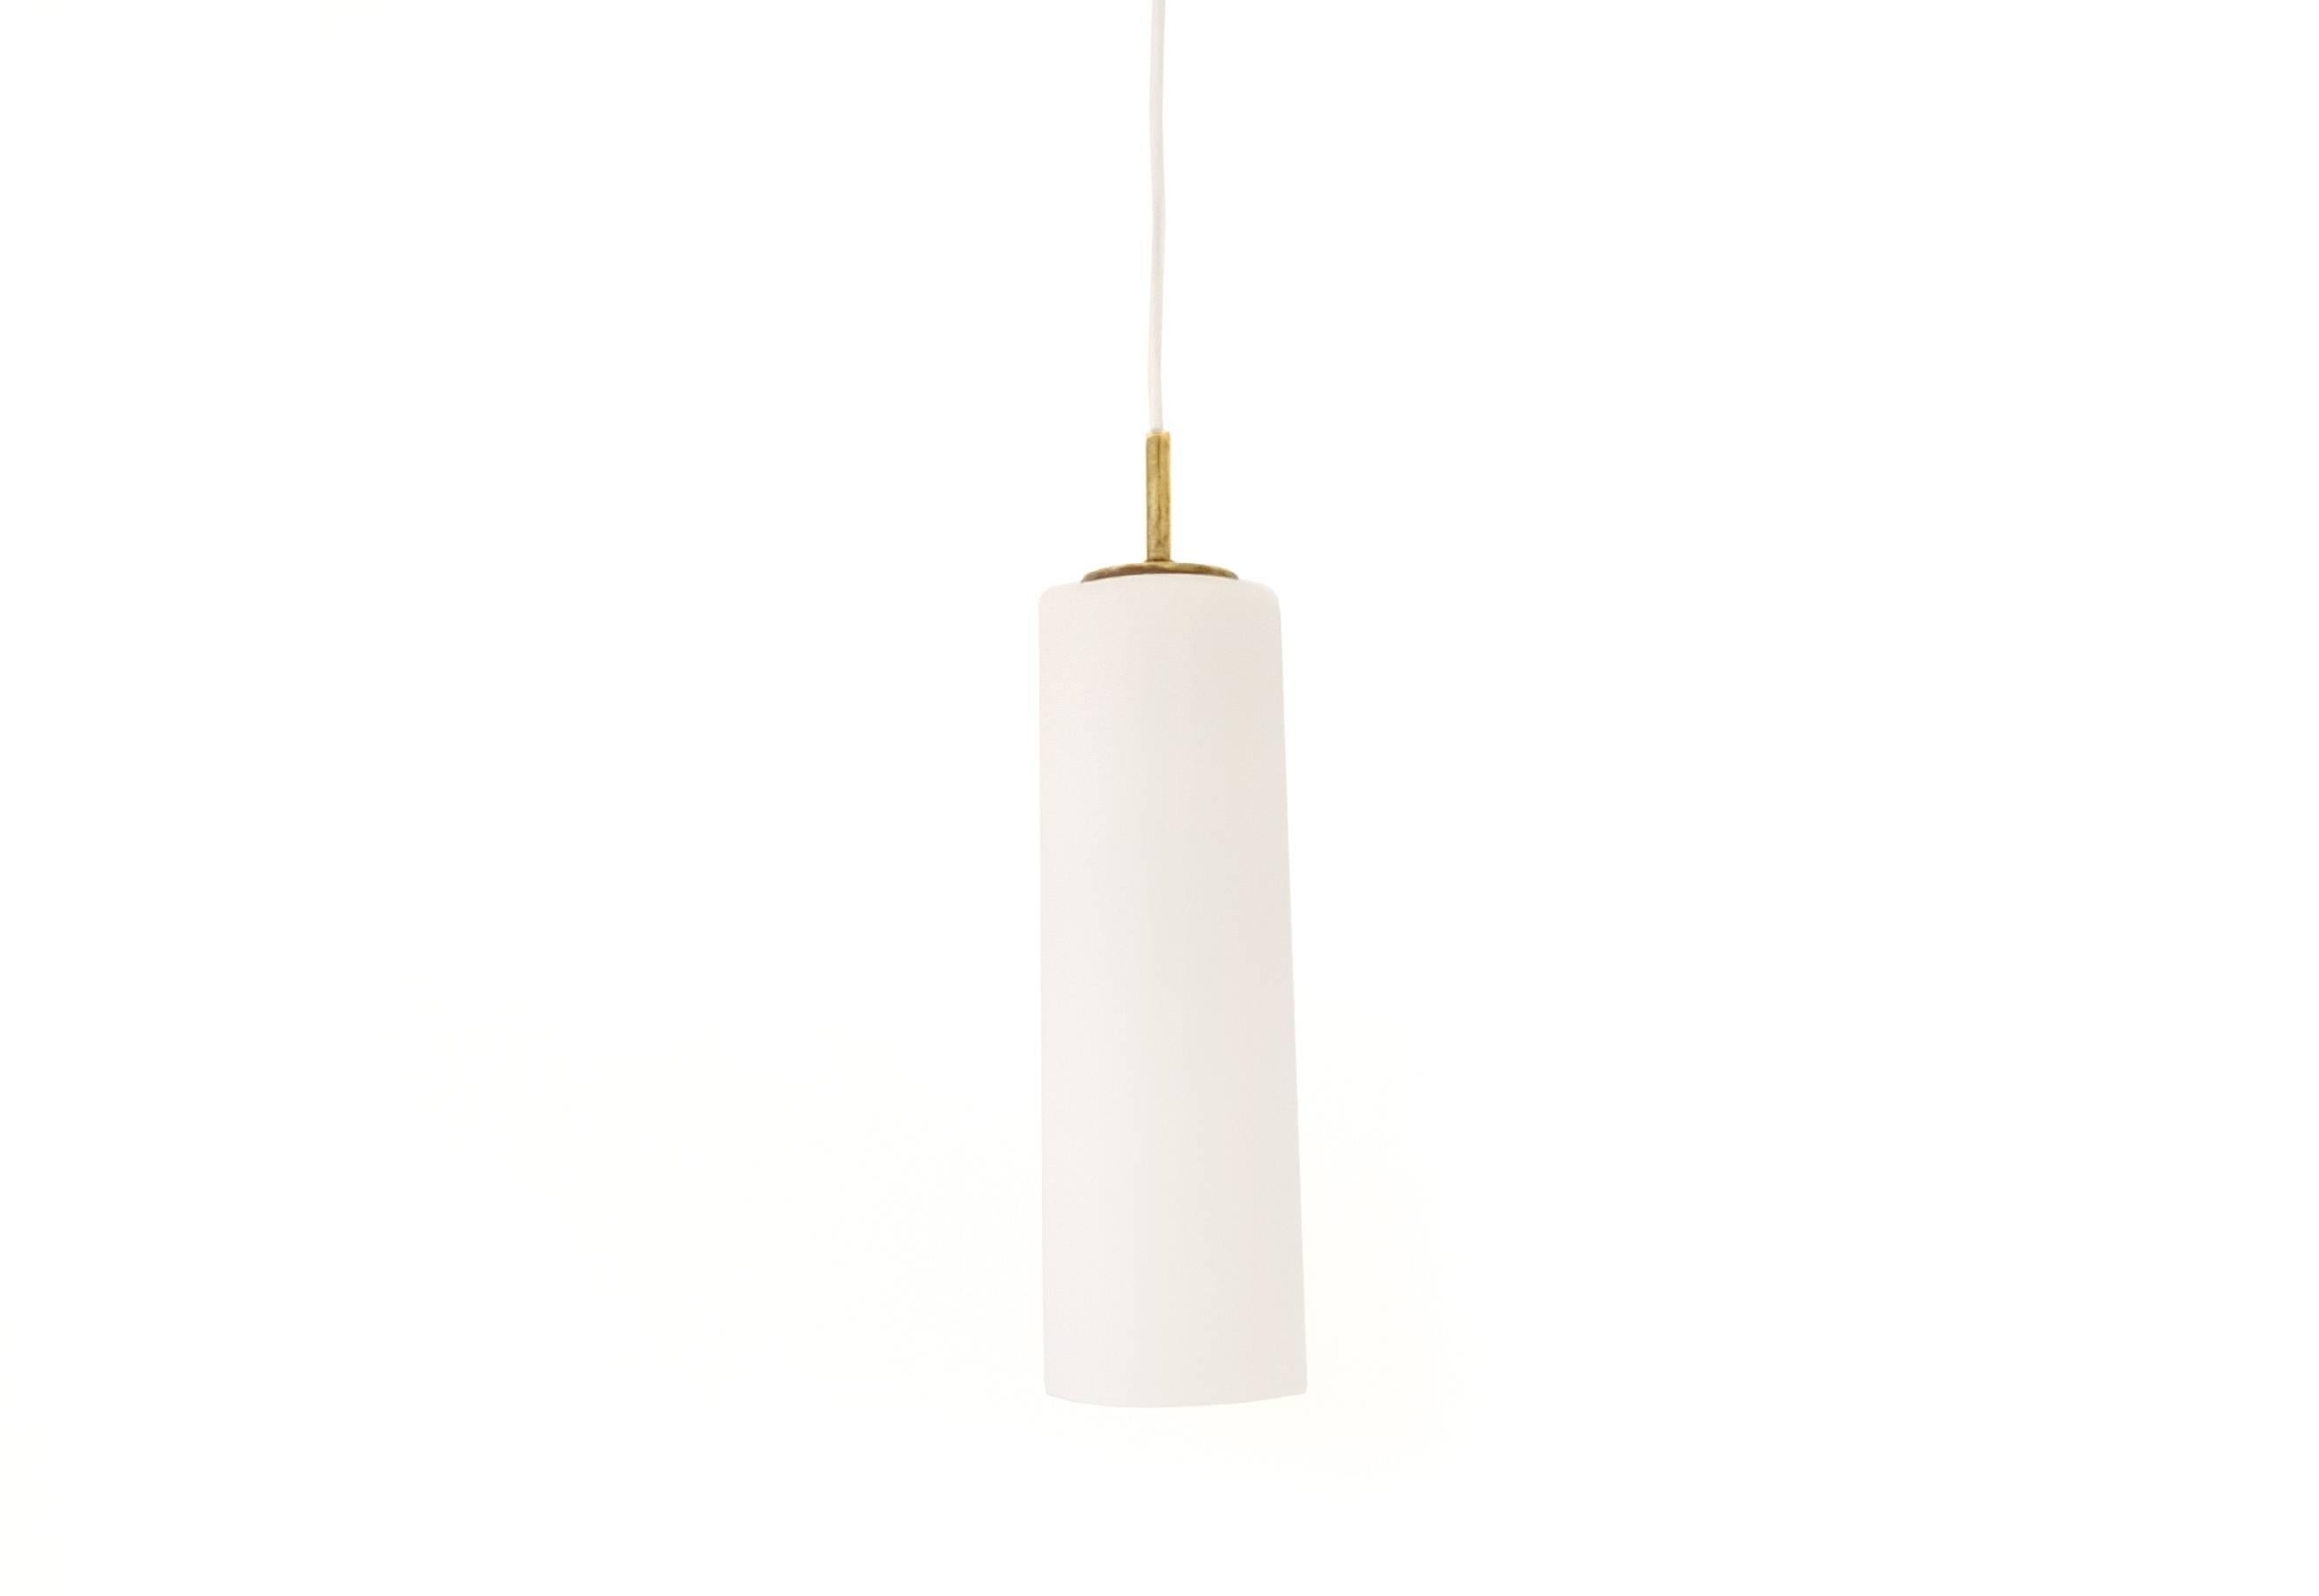 White Murano glass pendant designed by Gino Vistosi in the 1960s.
Completely original, made of white glass and brass. What we love about this glass hanging lamp is that you can also use it instead of a floor lamp, in a corner of the room for